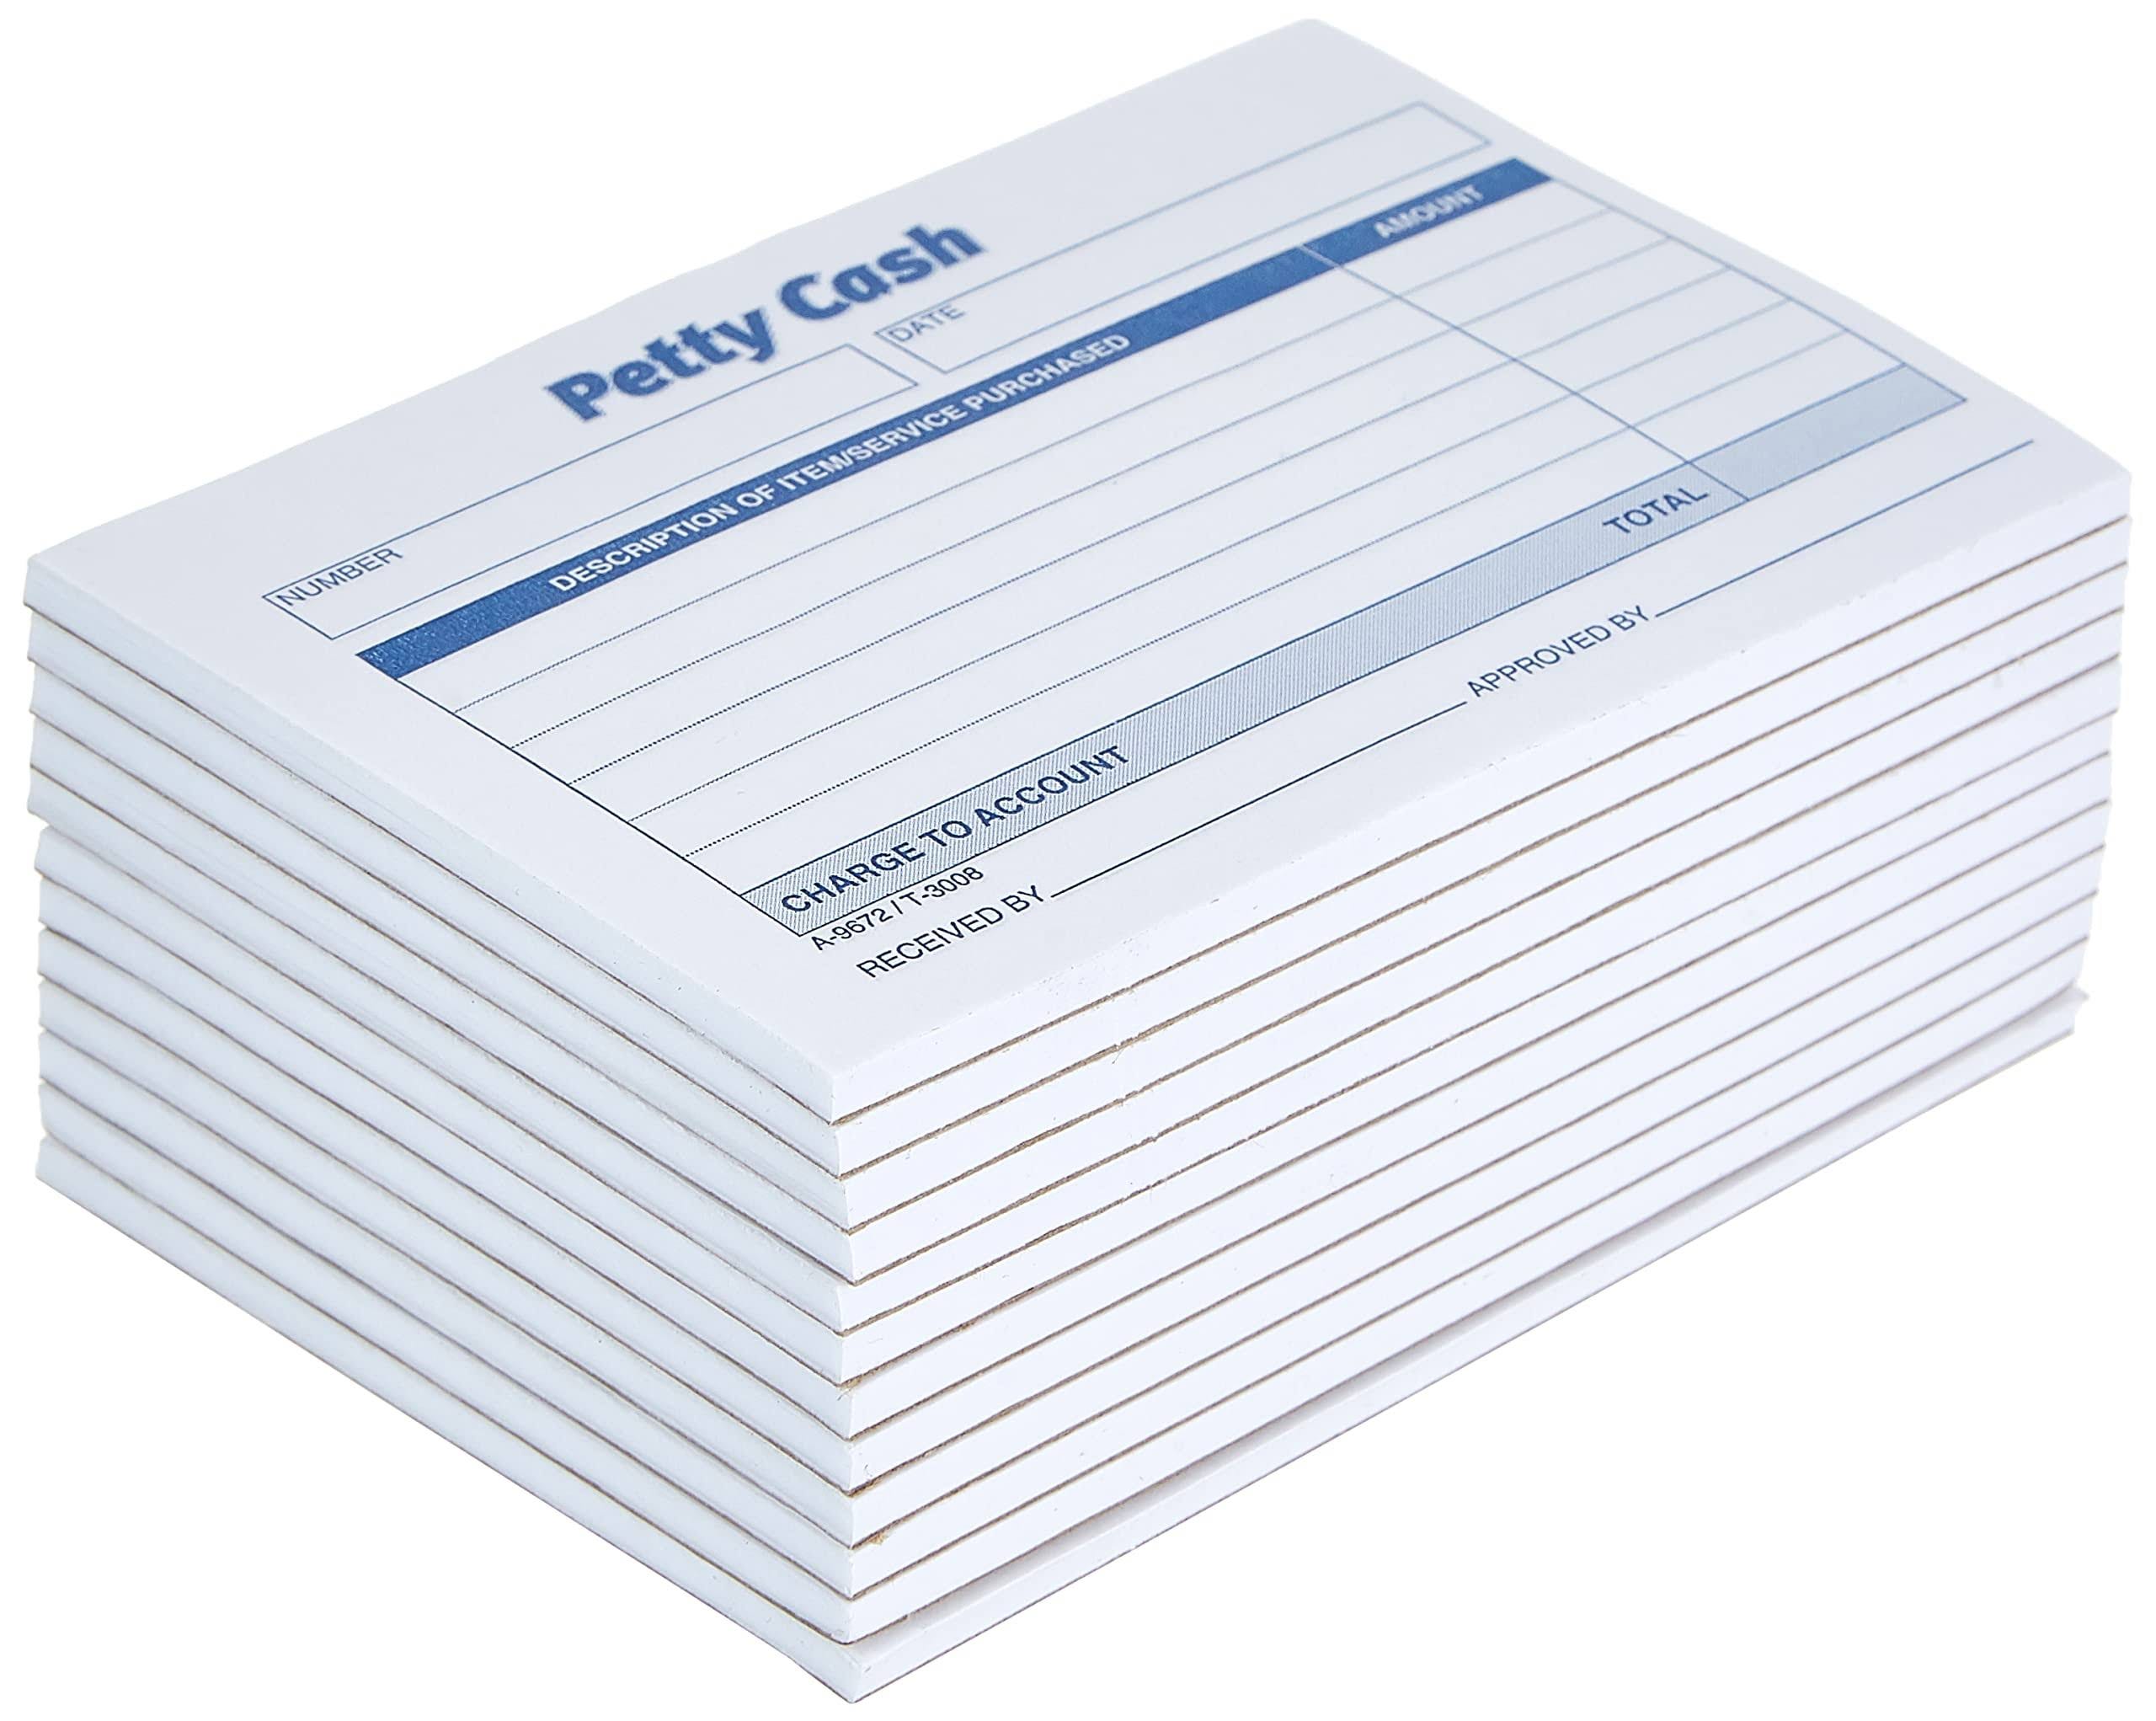 Adams Petty Cash Receipt Pad - 50 Sheets Side-Bound, White Paper for Cash Transactions Document | Image